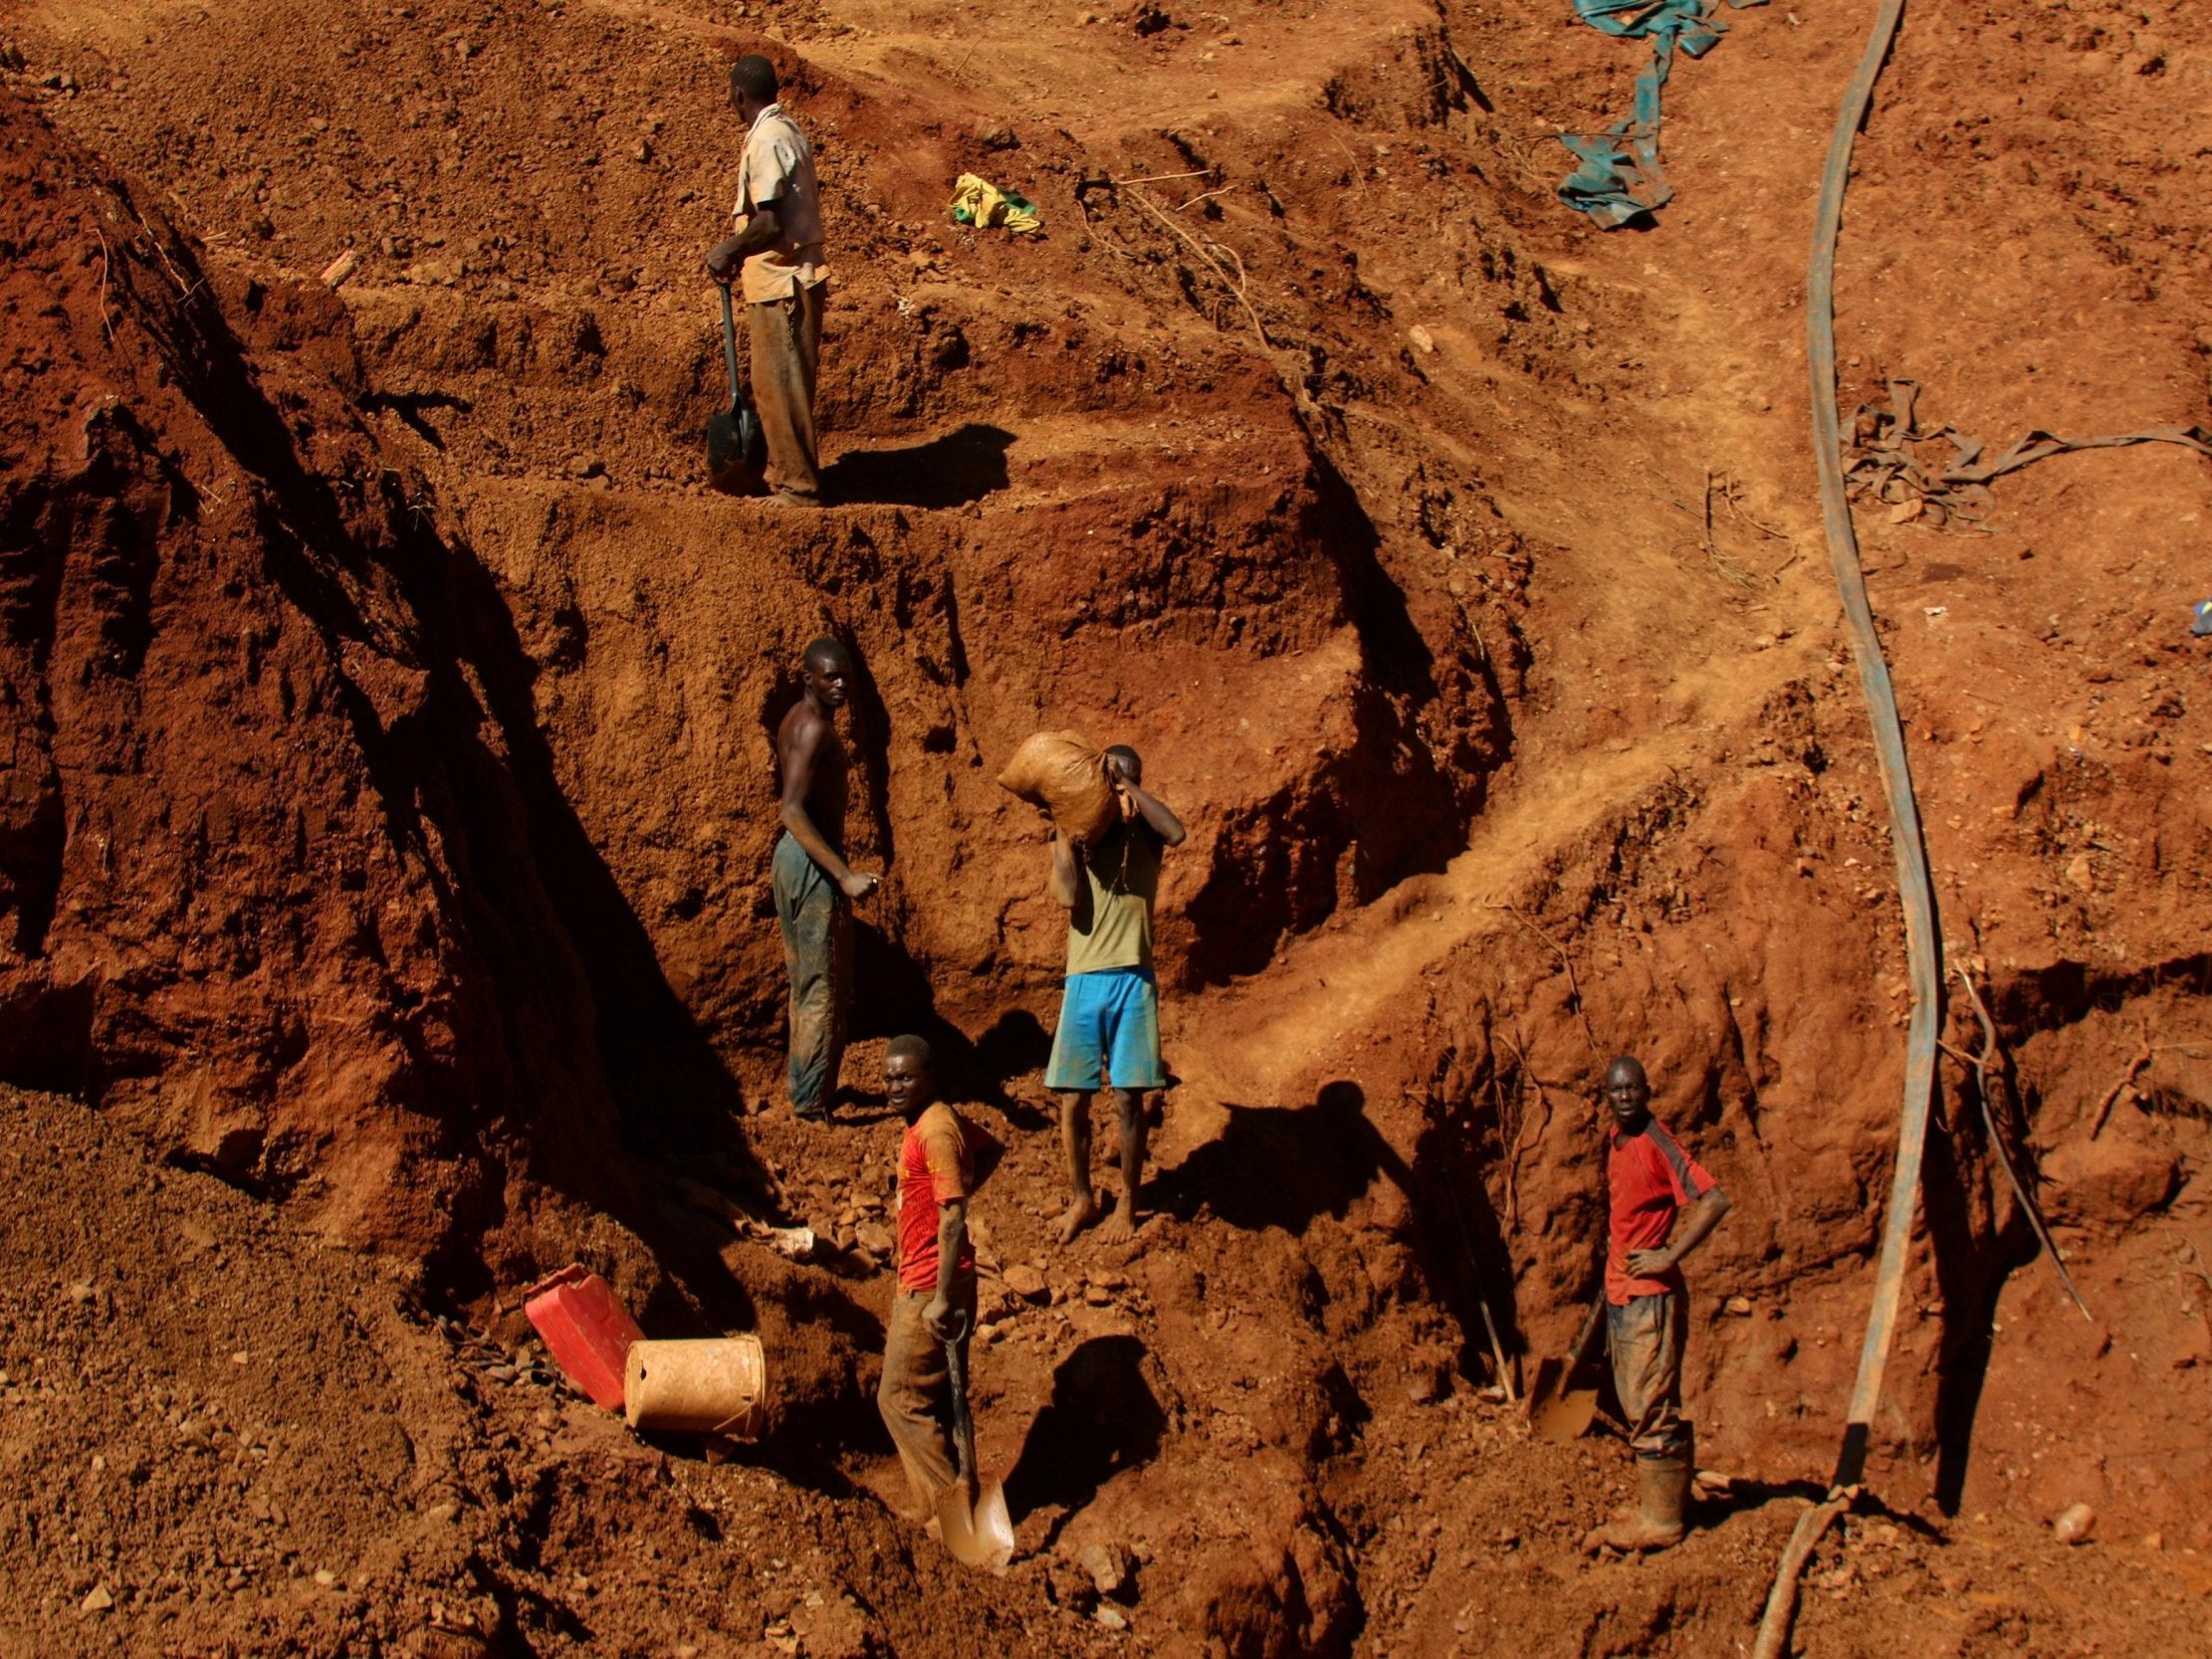 Illegal artisanal gold miners work at an open mine after occupying parts of Smithfield farm, owned by the former President Robert Mugabe's wife Grace Mugabe, in Mazowe, Zimbabwe, 5 April 2018.